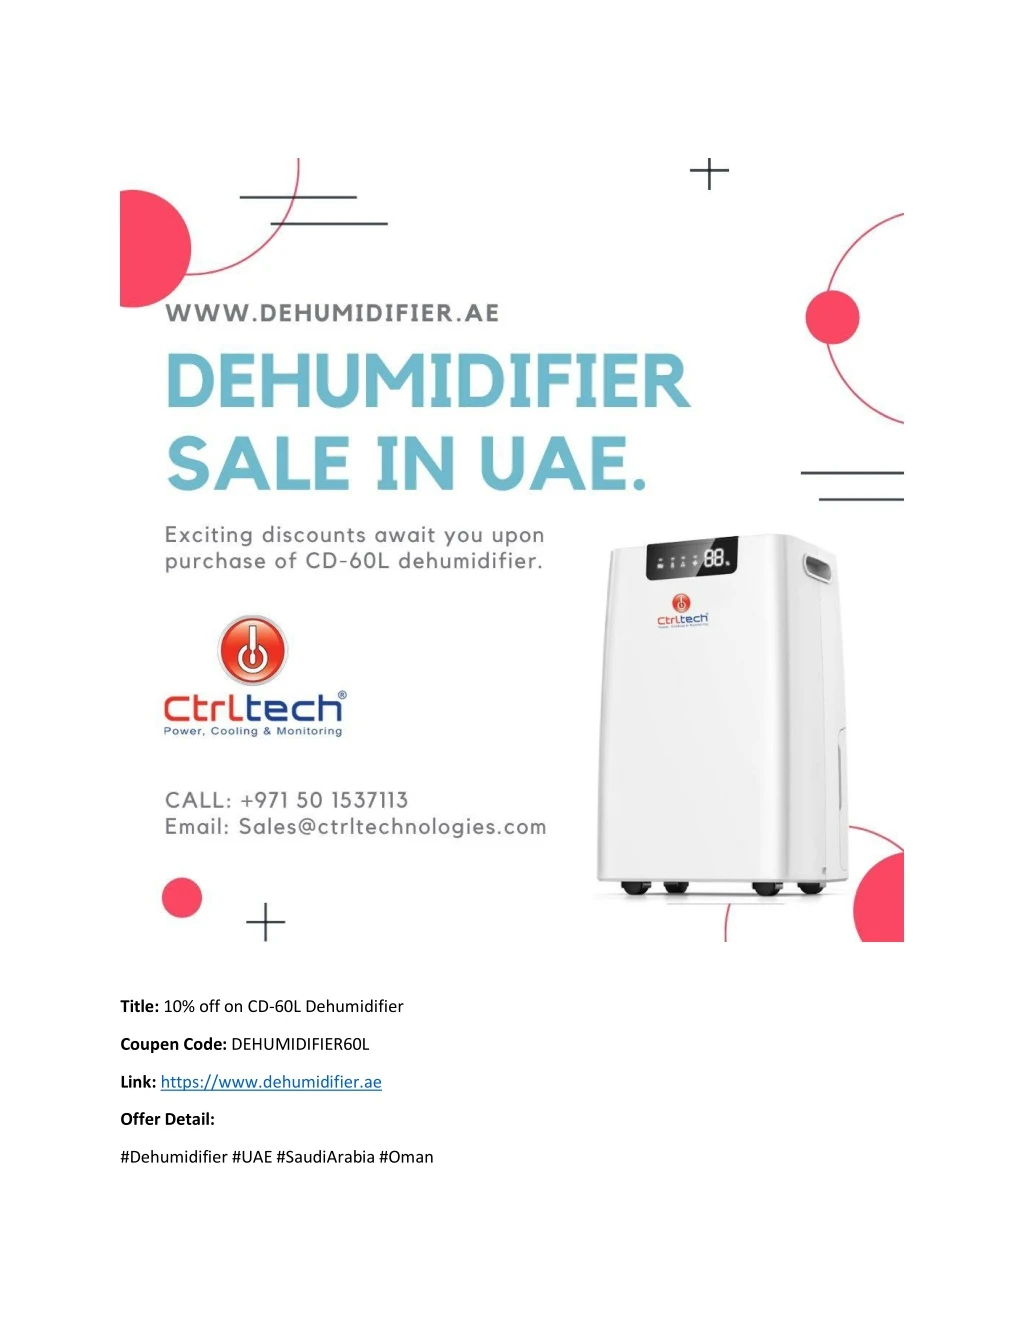 title 10 off on cd 60l dehumidifier